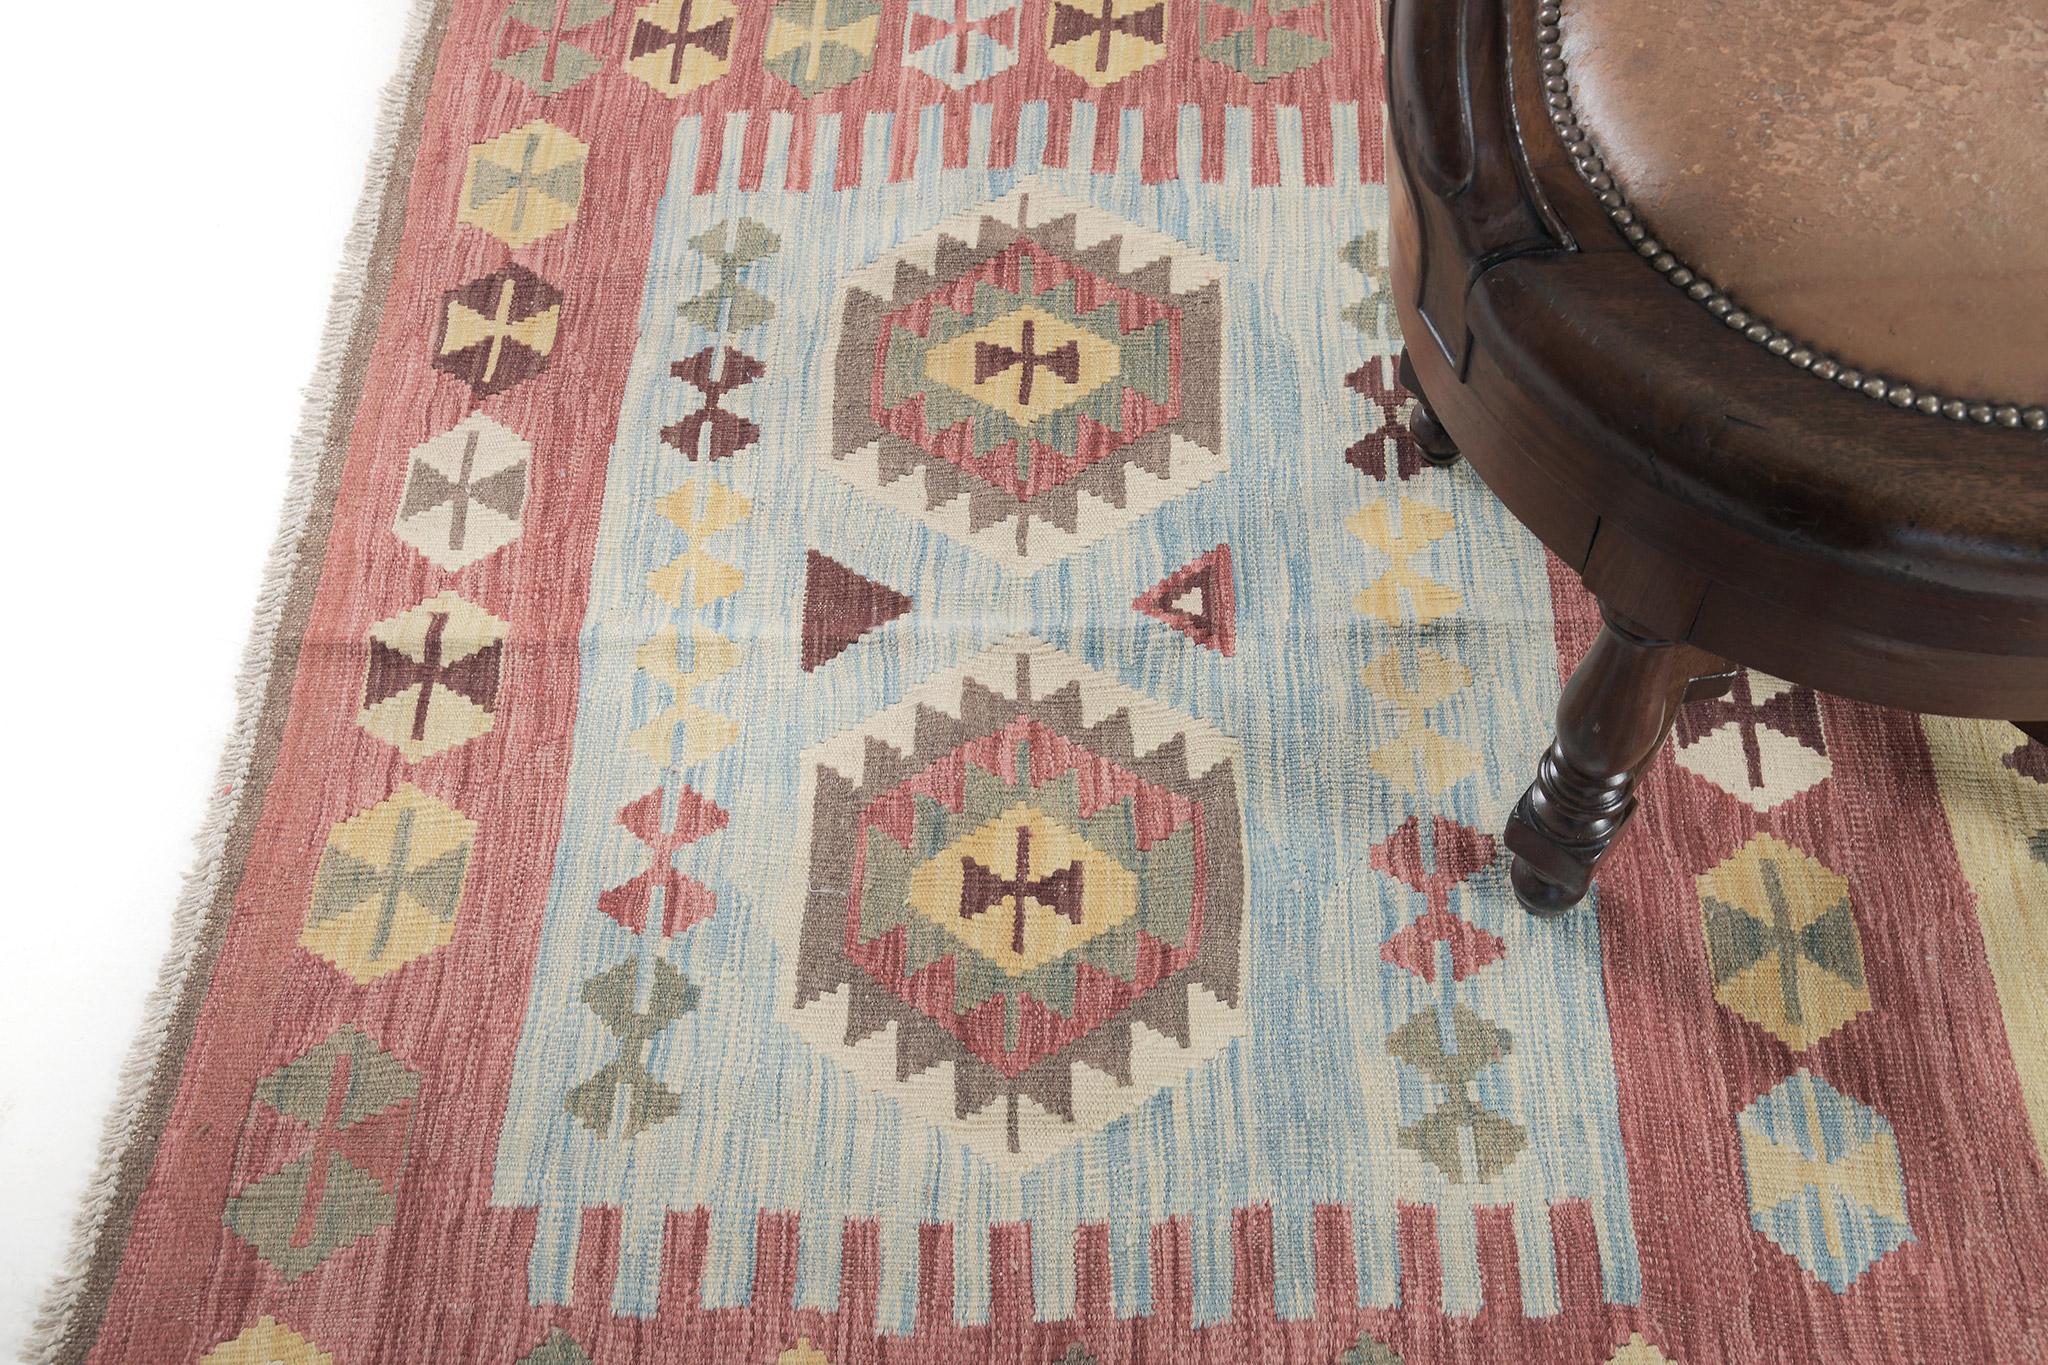 Flatweave wool features a series of traditional motifs that gives your interior more eccentricity. This rug makes its own identity and is more engaging because of its pattern and full story. Another masterpiece that can be added to your